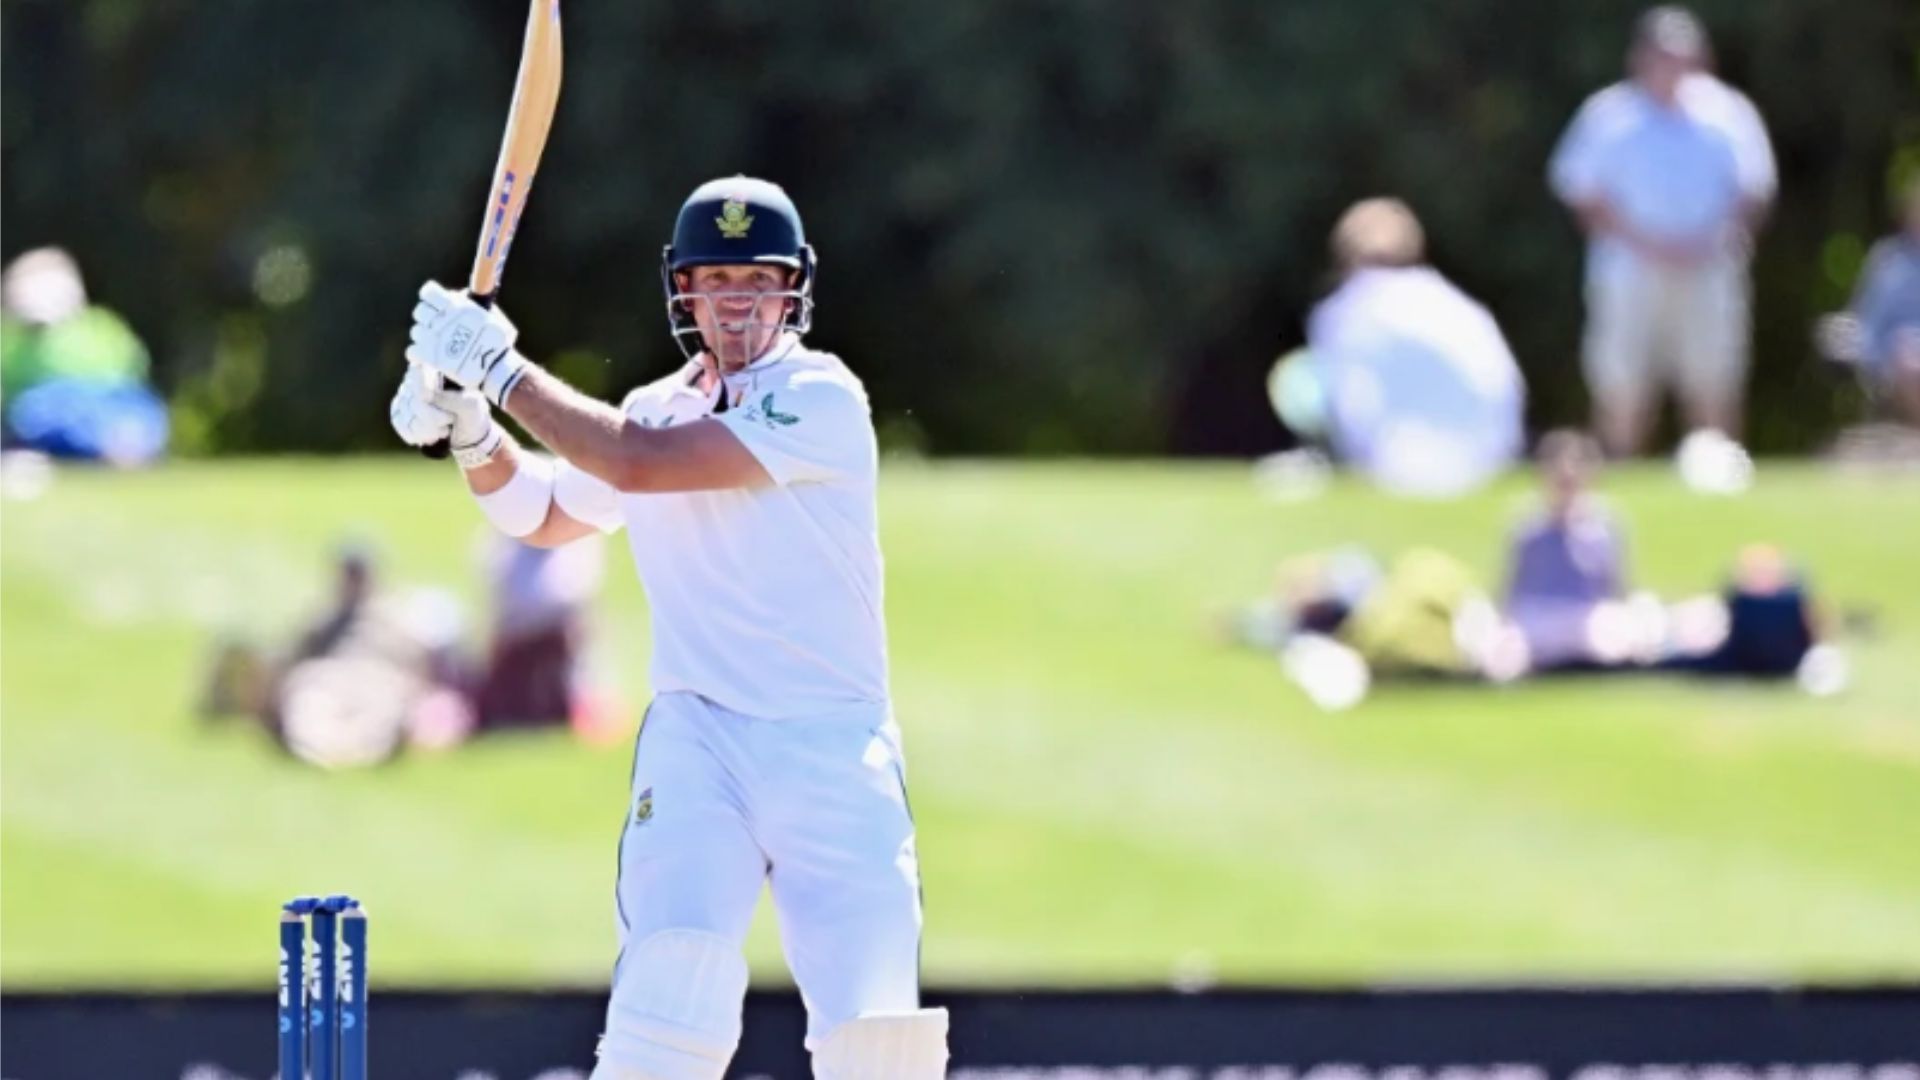 Sarel Erwee en route to his maiden Test century against New Zealand. (Pic: Getty)